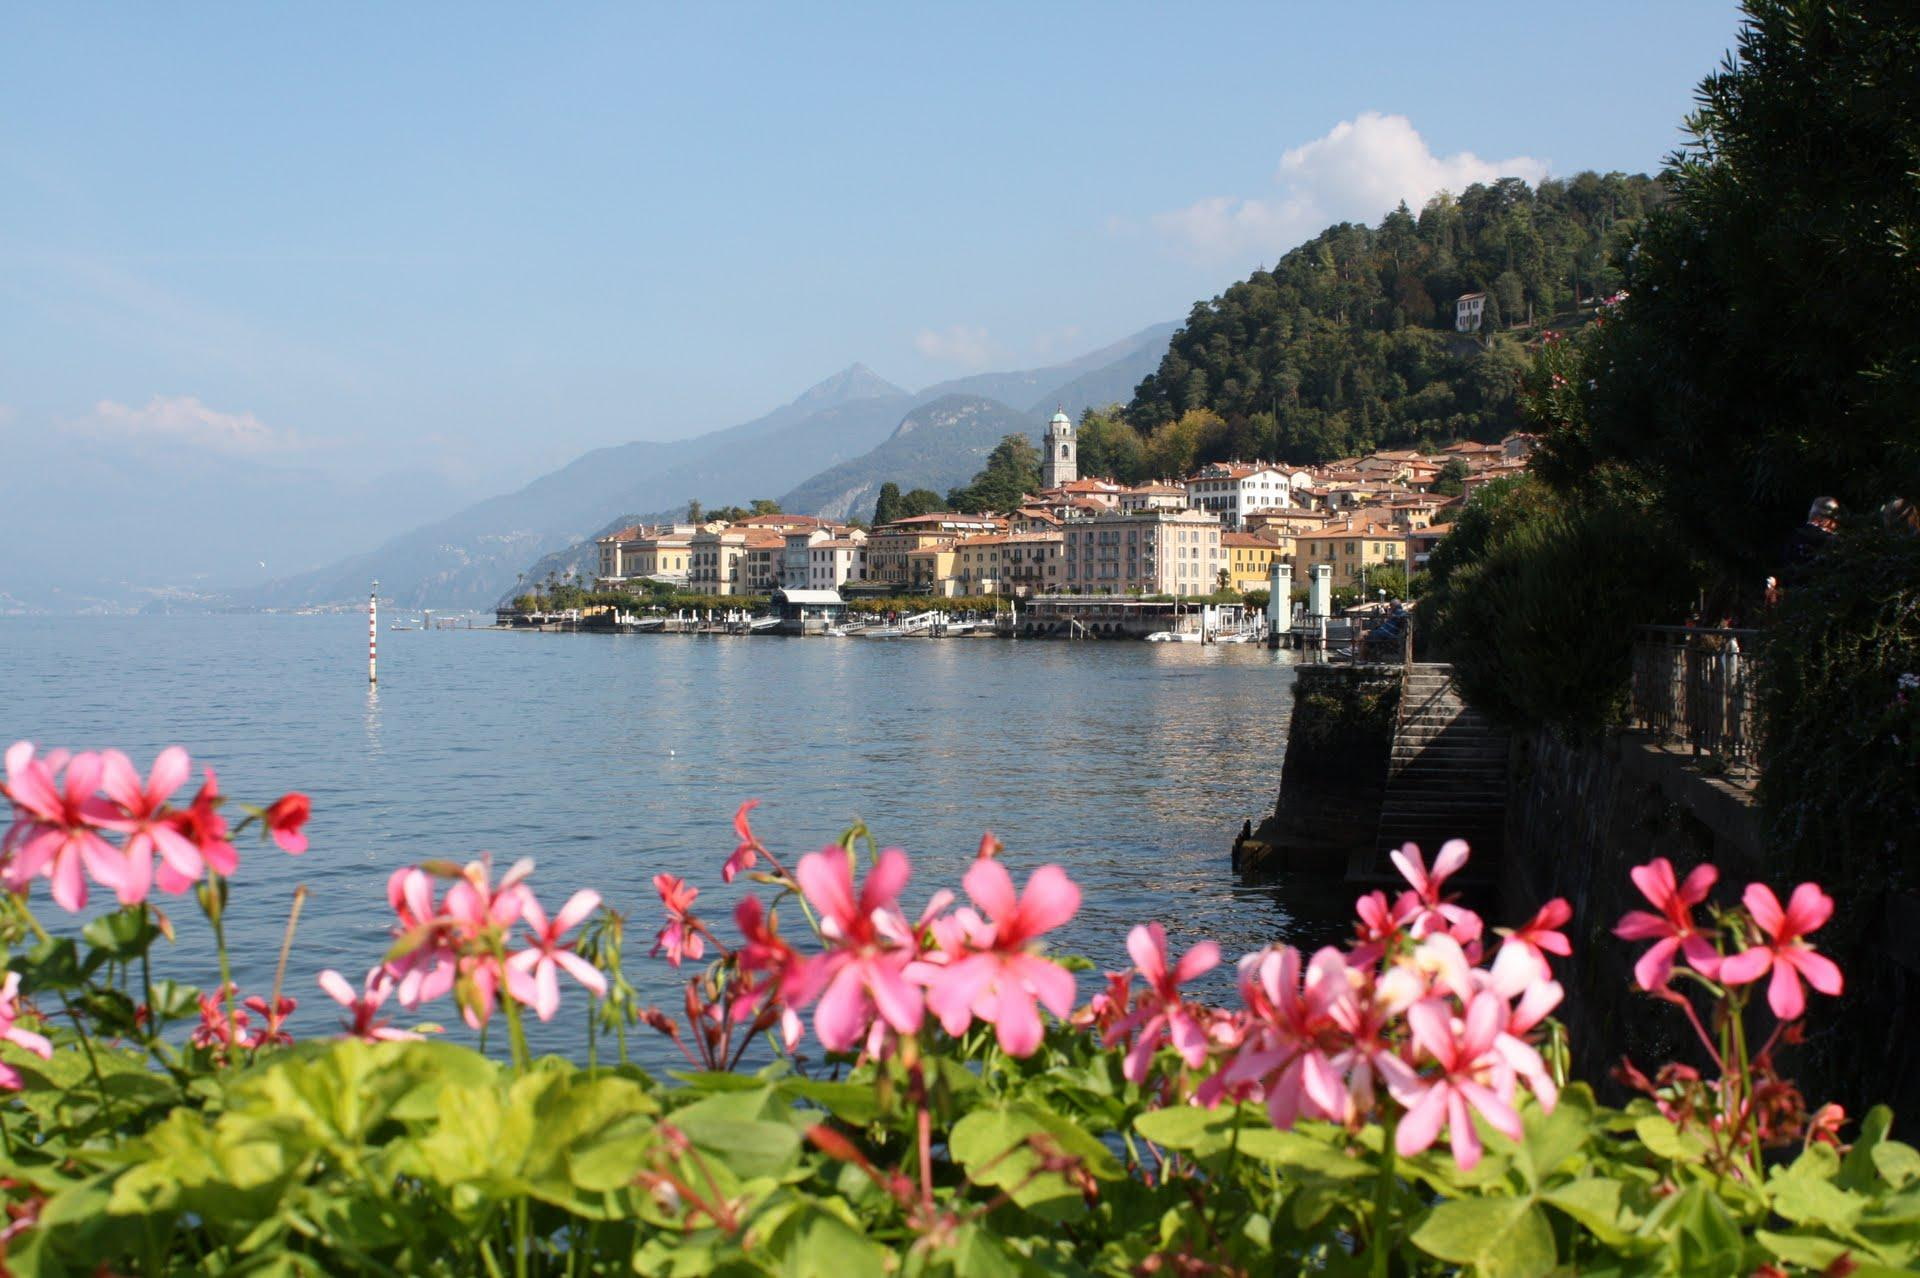 Bellagio On Lake Como, town, hills, flowers, nature and landscapes